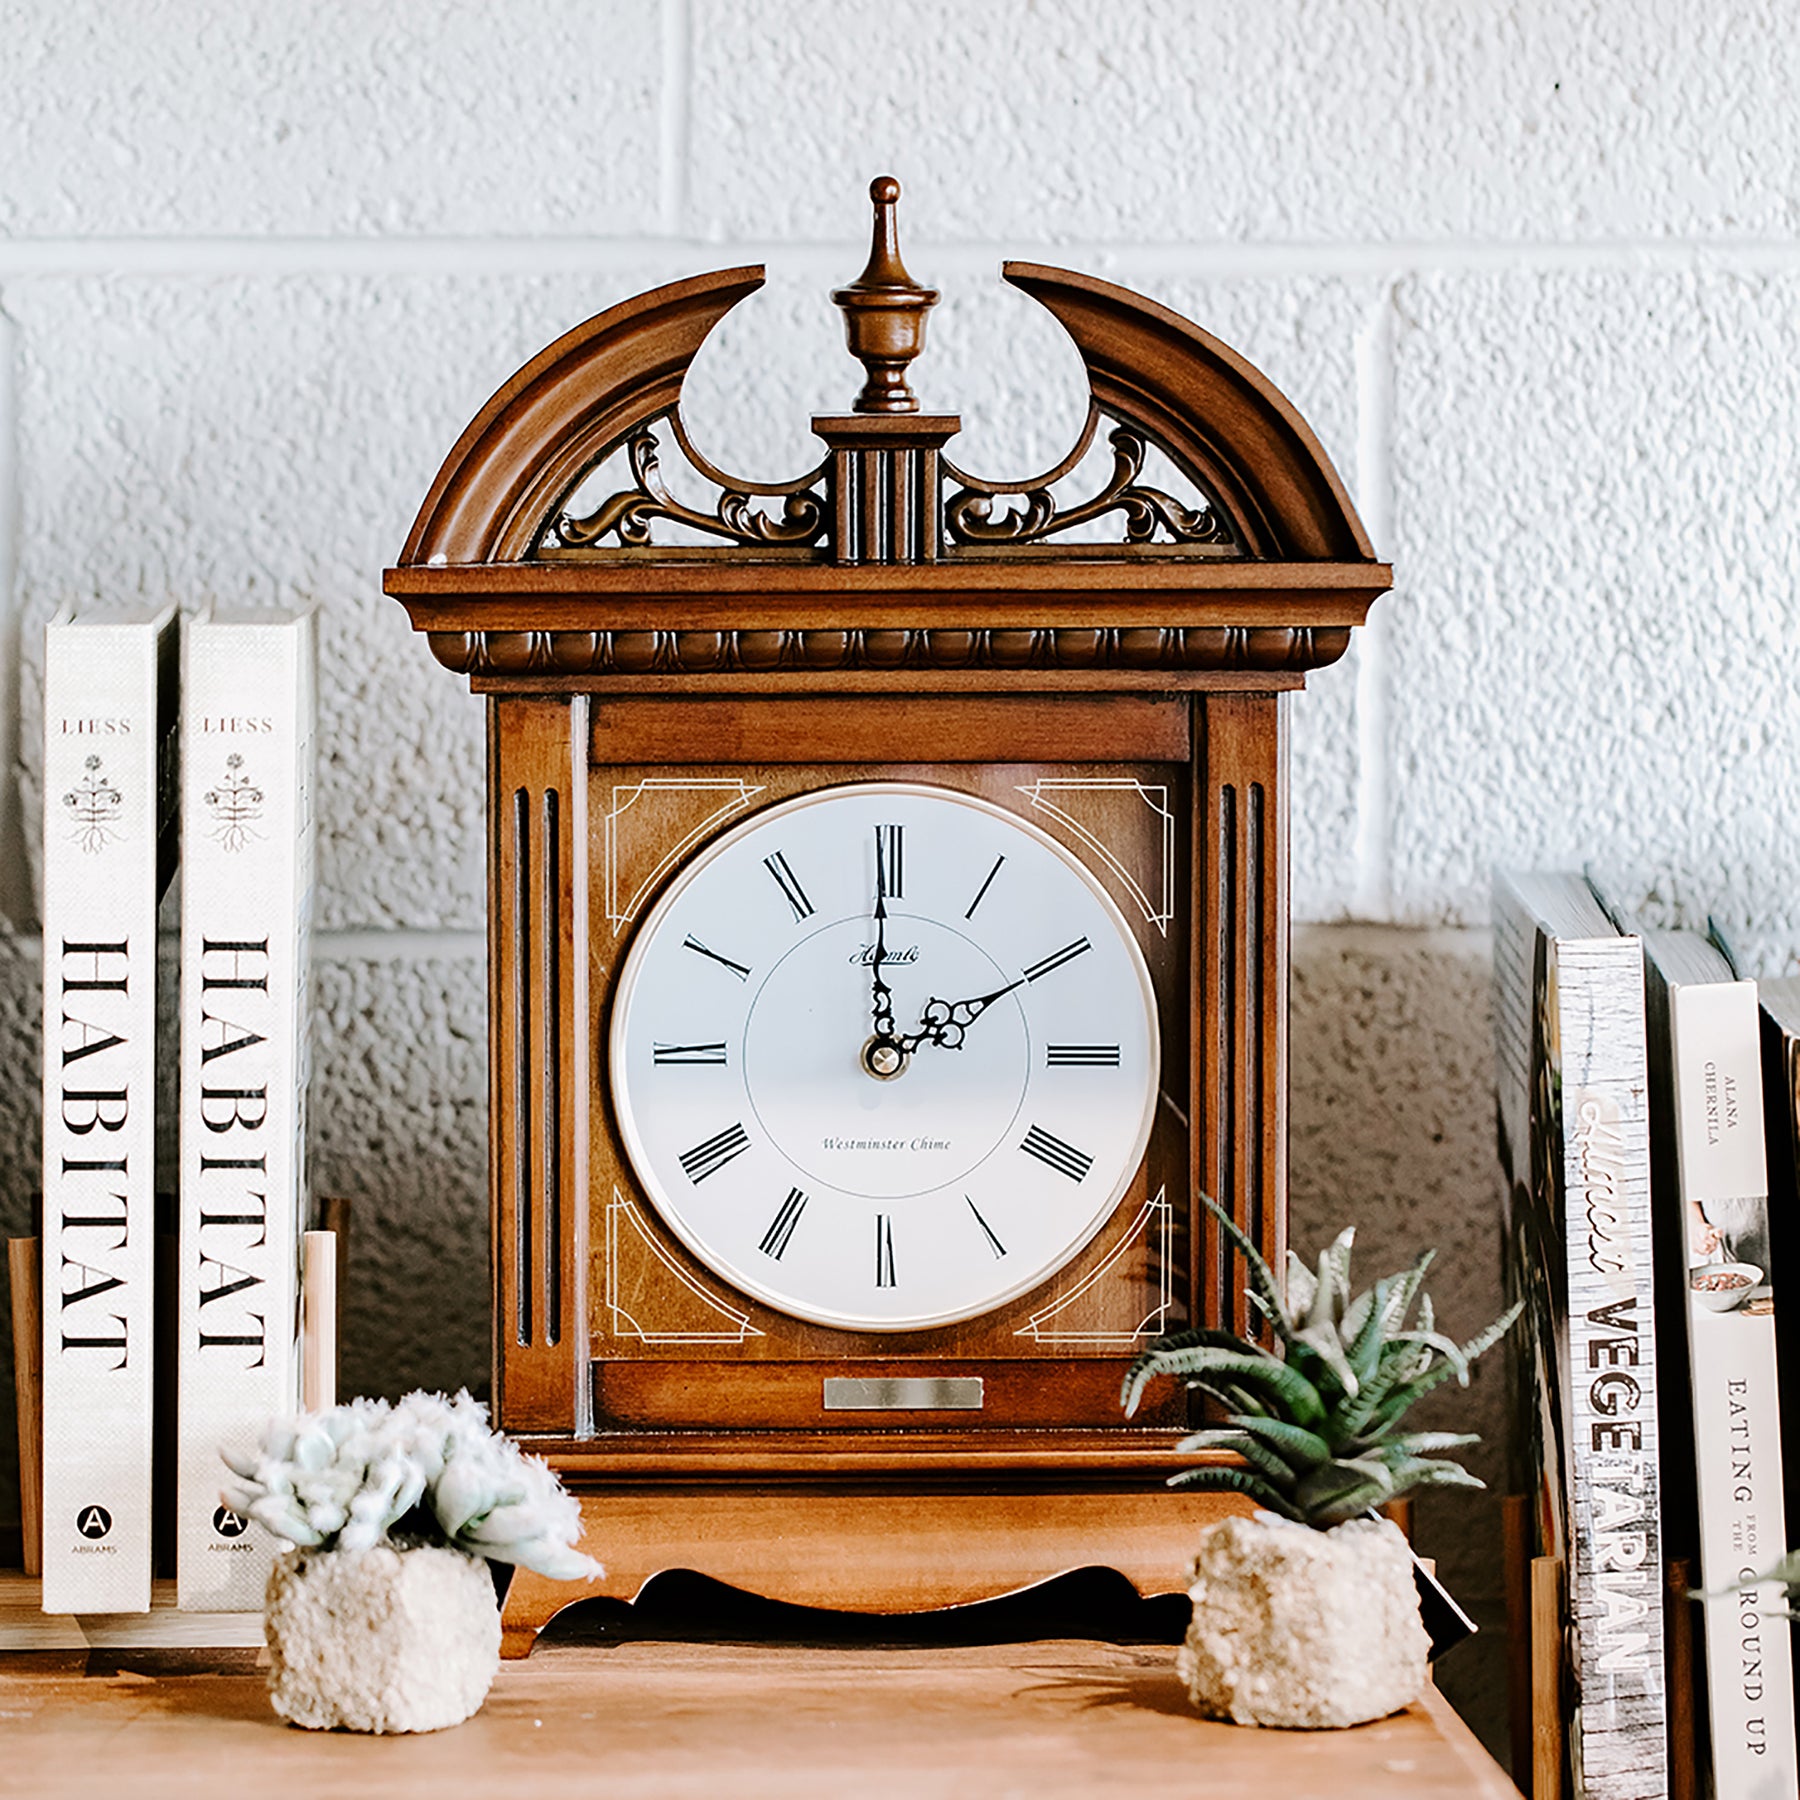 How to Change The Time on Your Old Clock - Without Messing It Up!